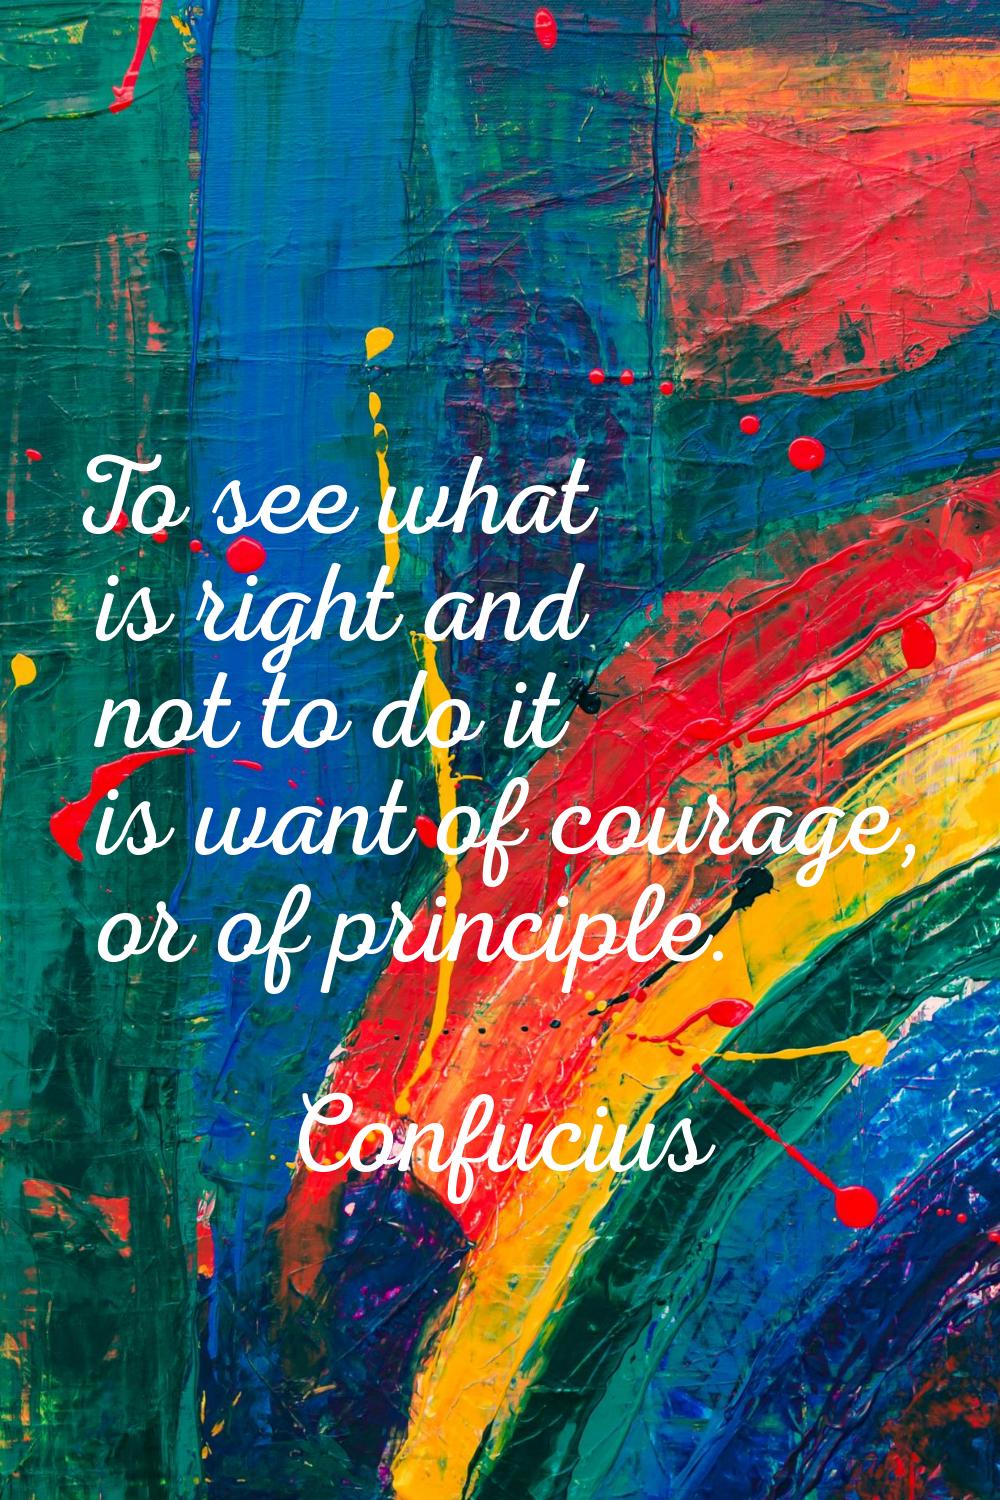 To see what is right and not to do it is want of courage, or of principle.